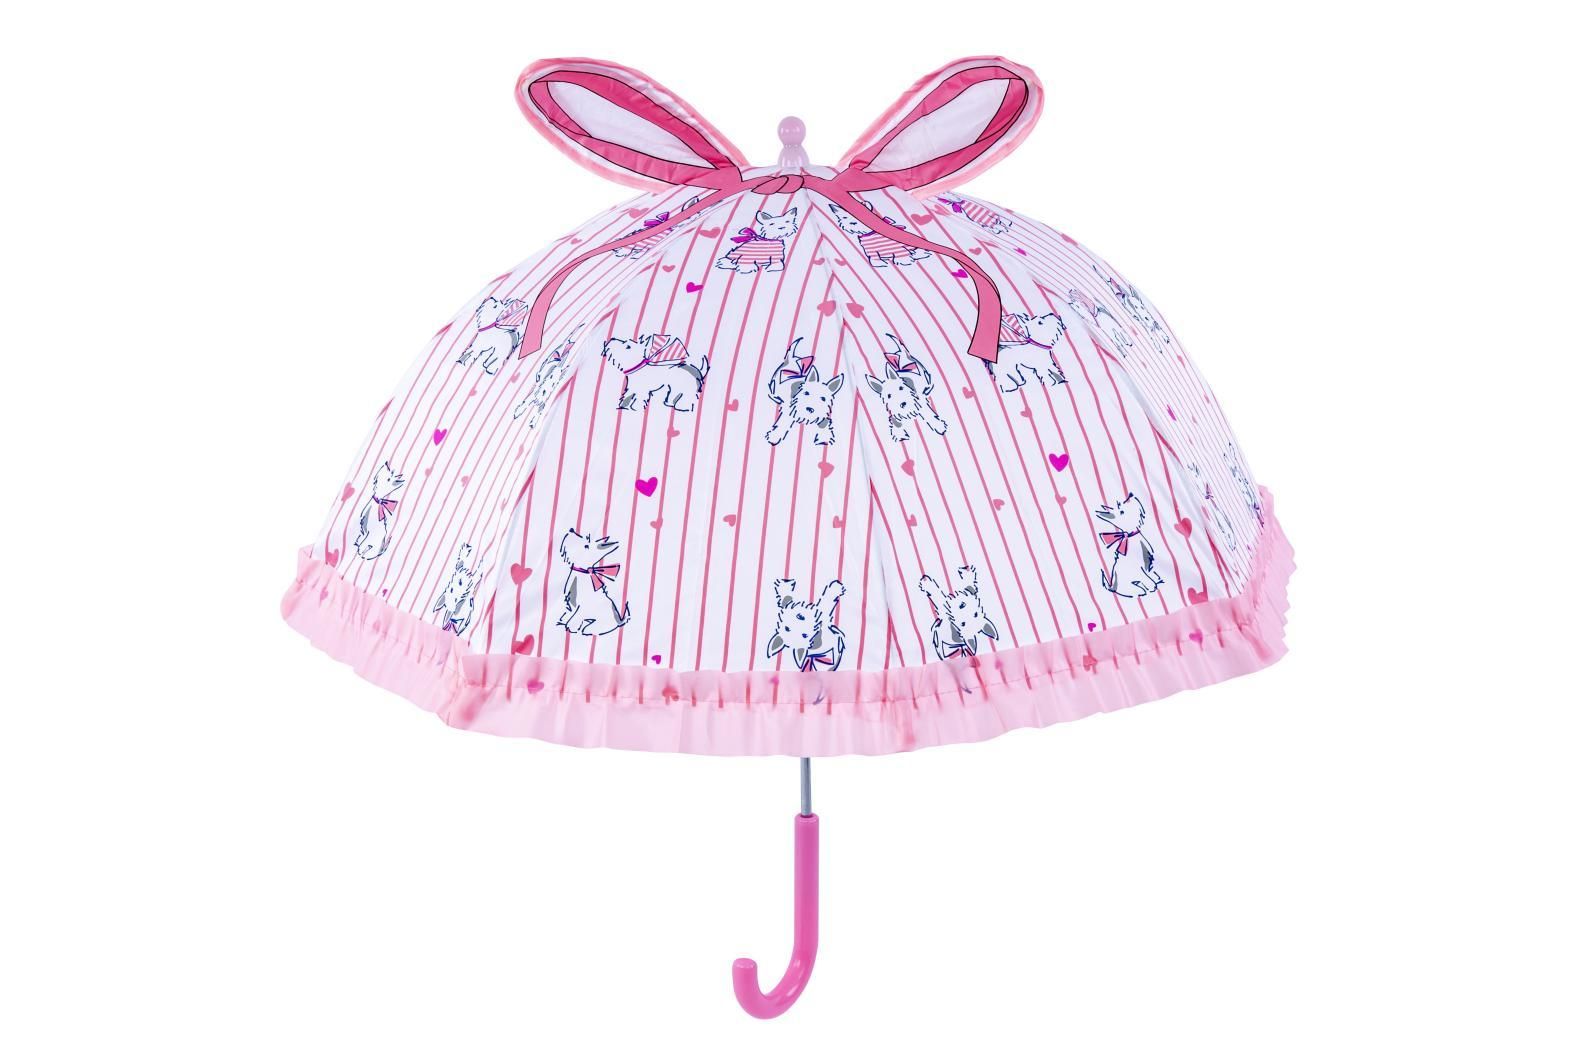 Polyester Umbrella With Allover Printing For Kids